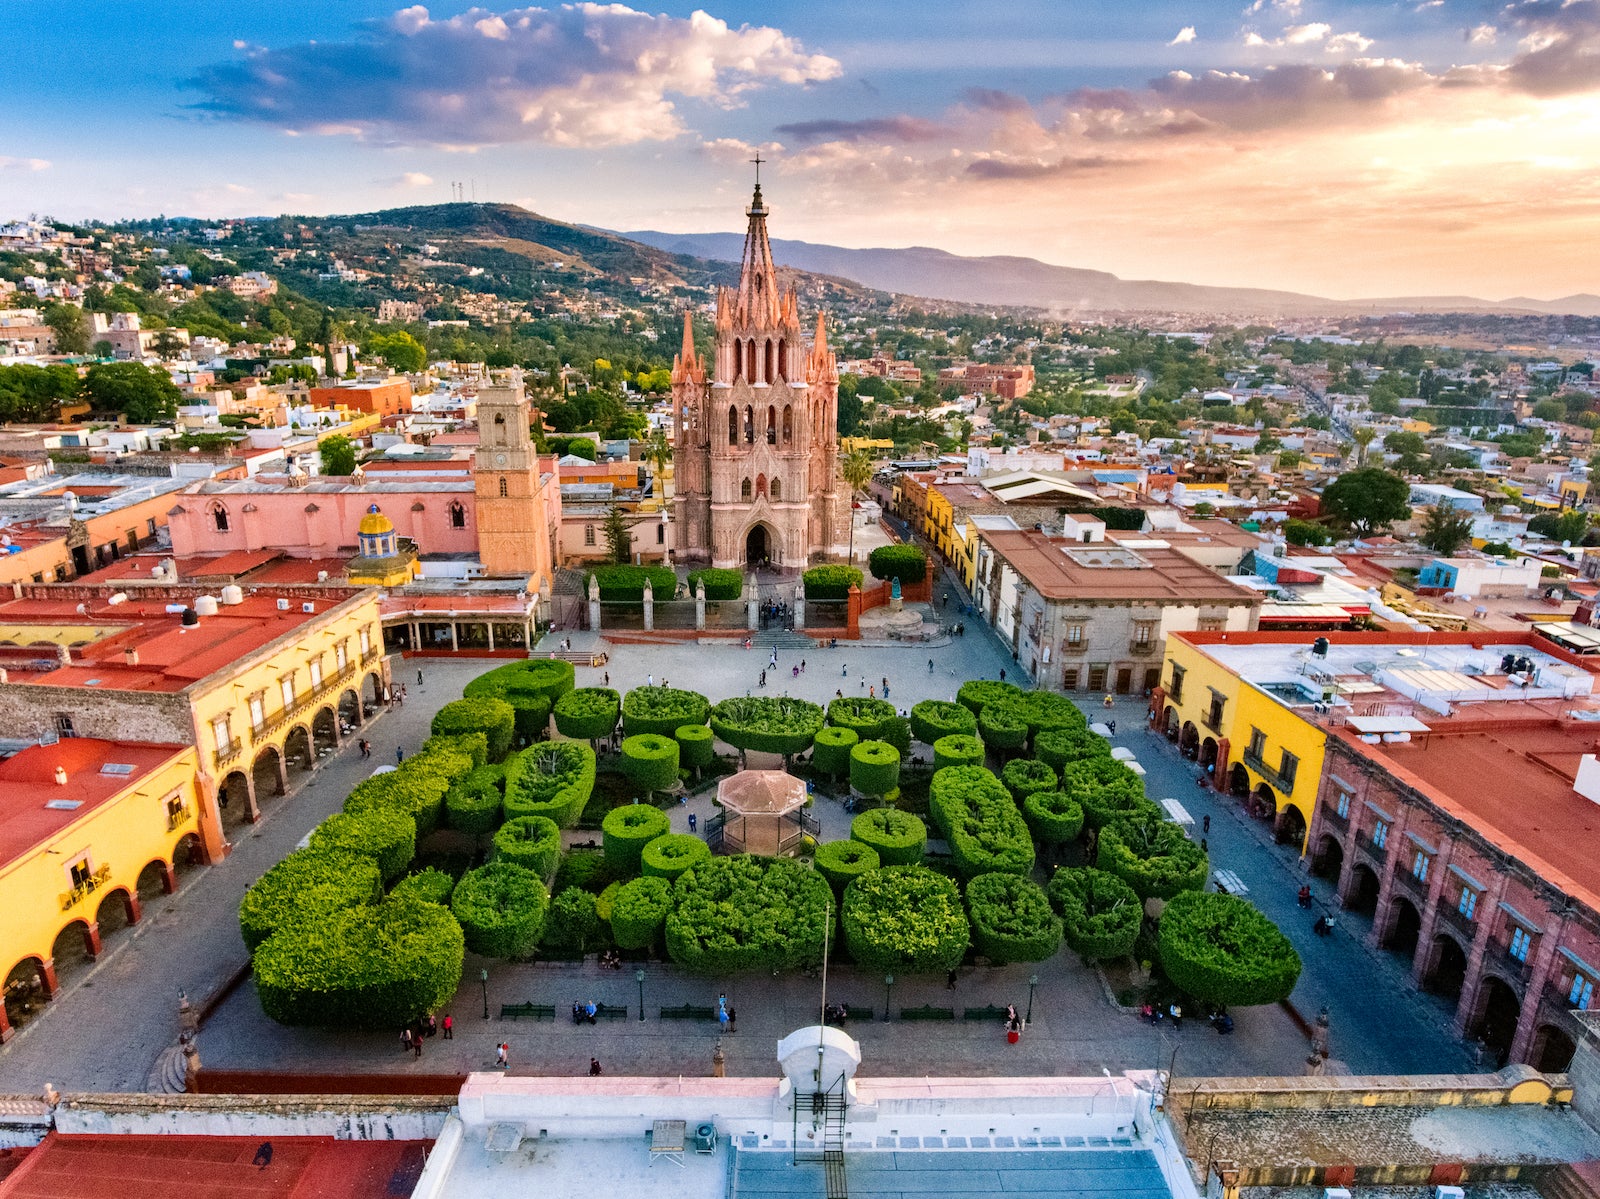 Fly nonstop to San Miguel de Allende from Chicago, Dallas and Houston from $234